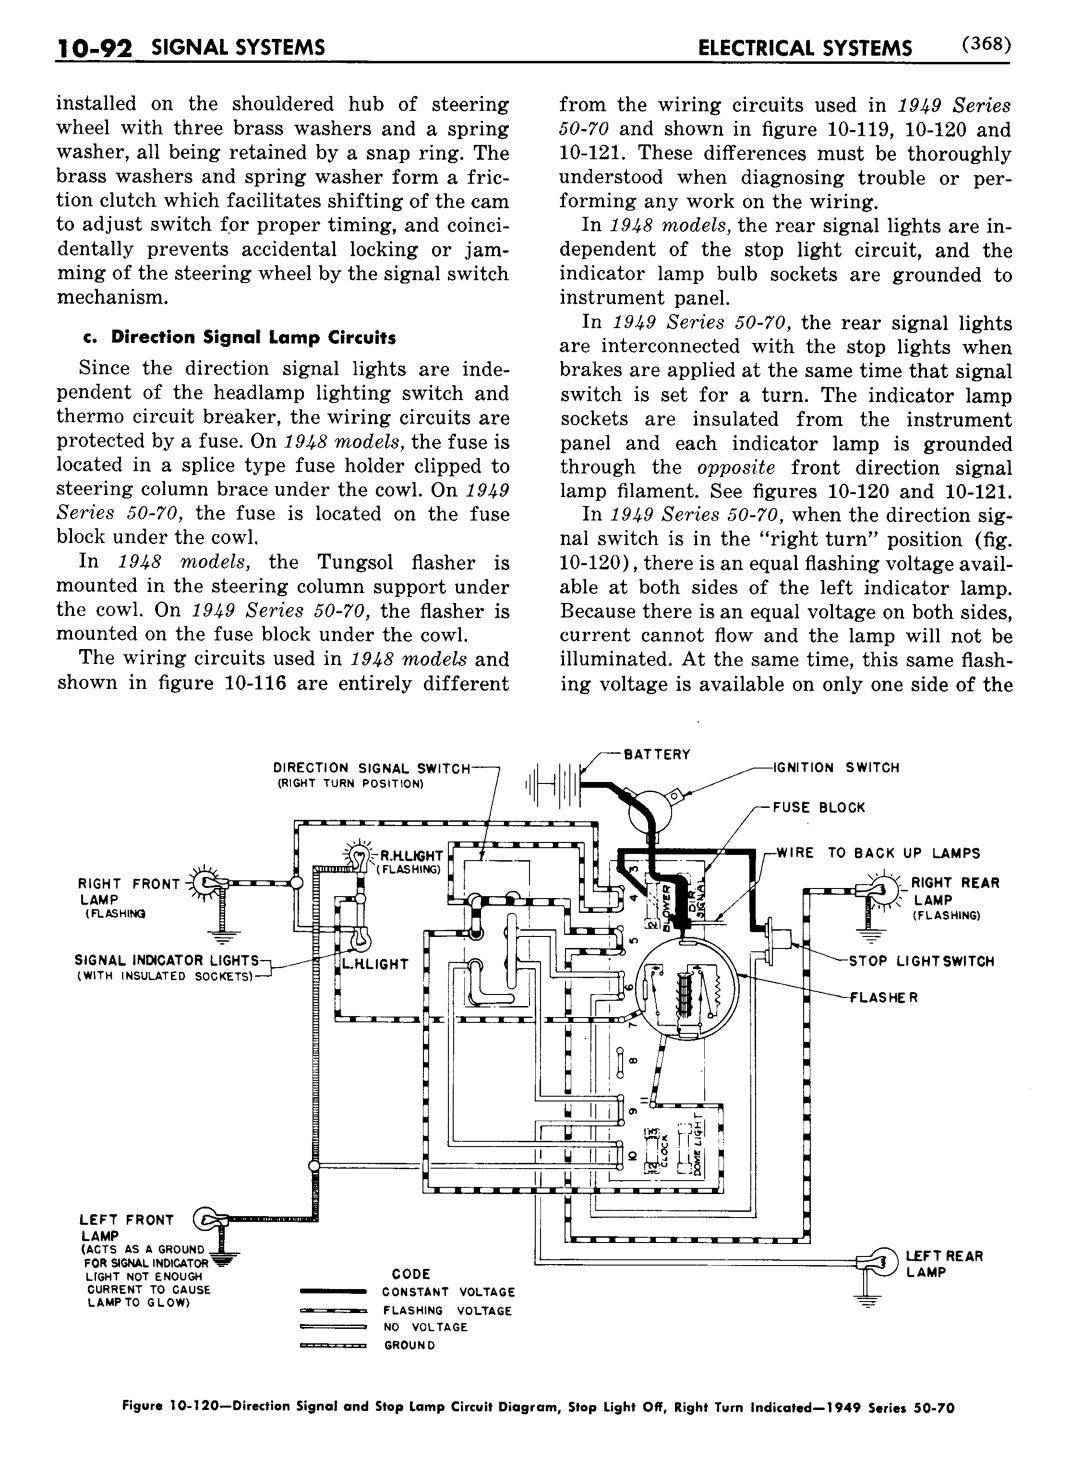 n_11 1948 Buick Shop Manual - Electrical Systems-092-092.jpg